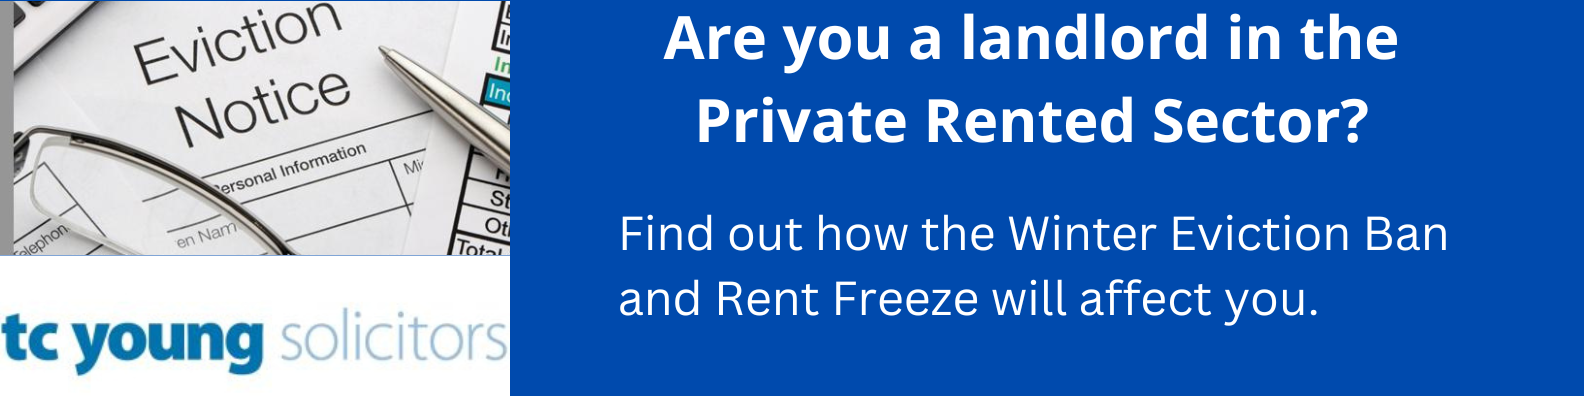 Private Rented Sector blog link